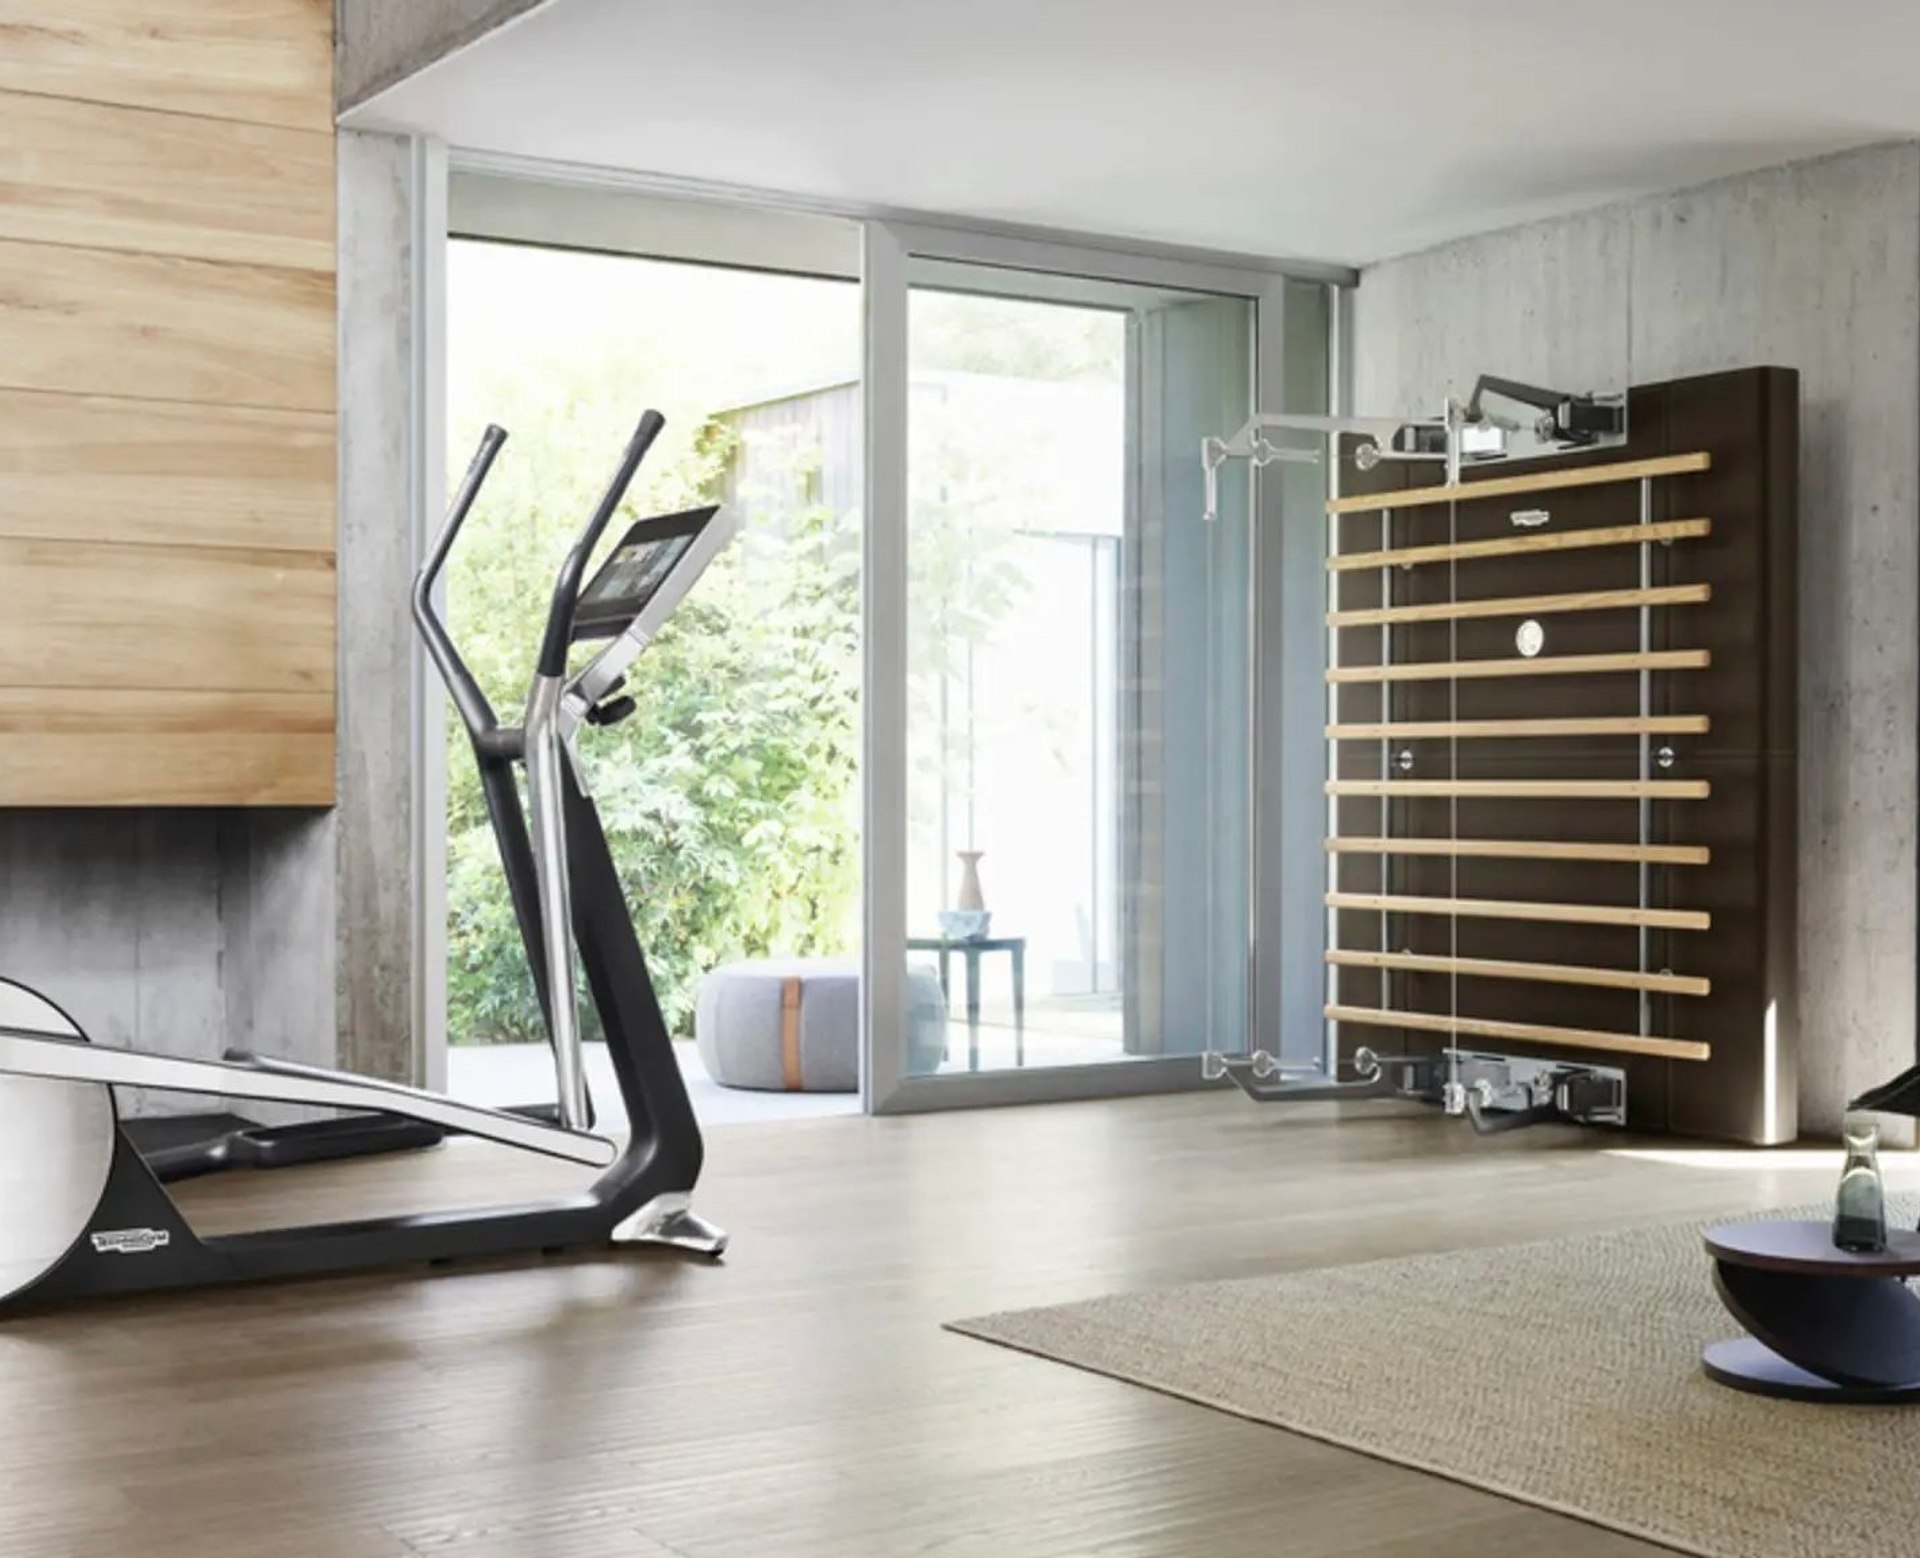 Home gym - design your perfect wellness space with Technogym